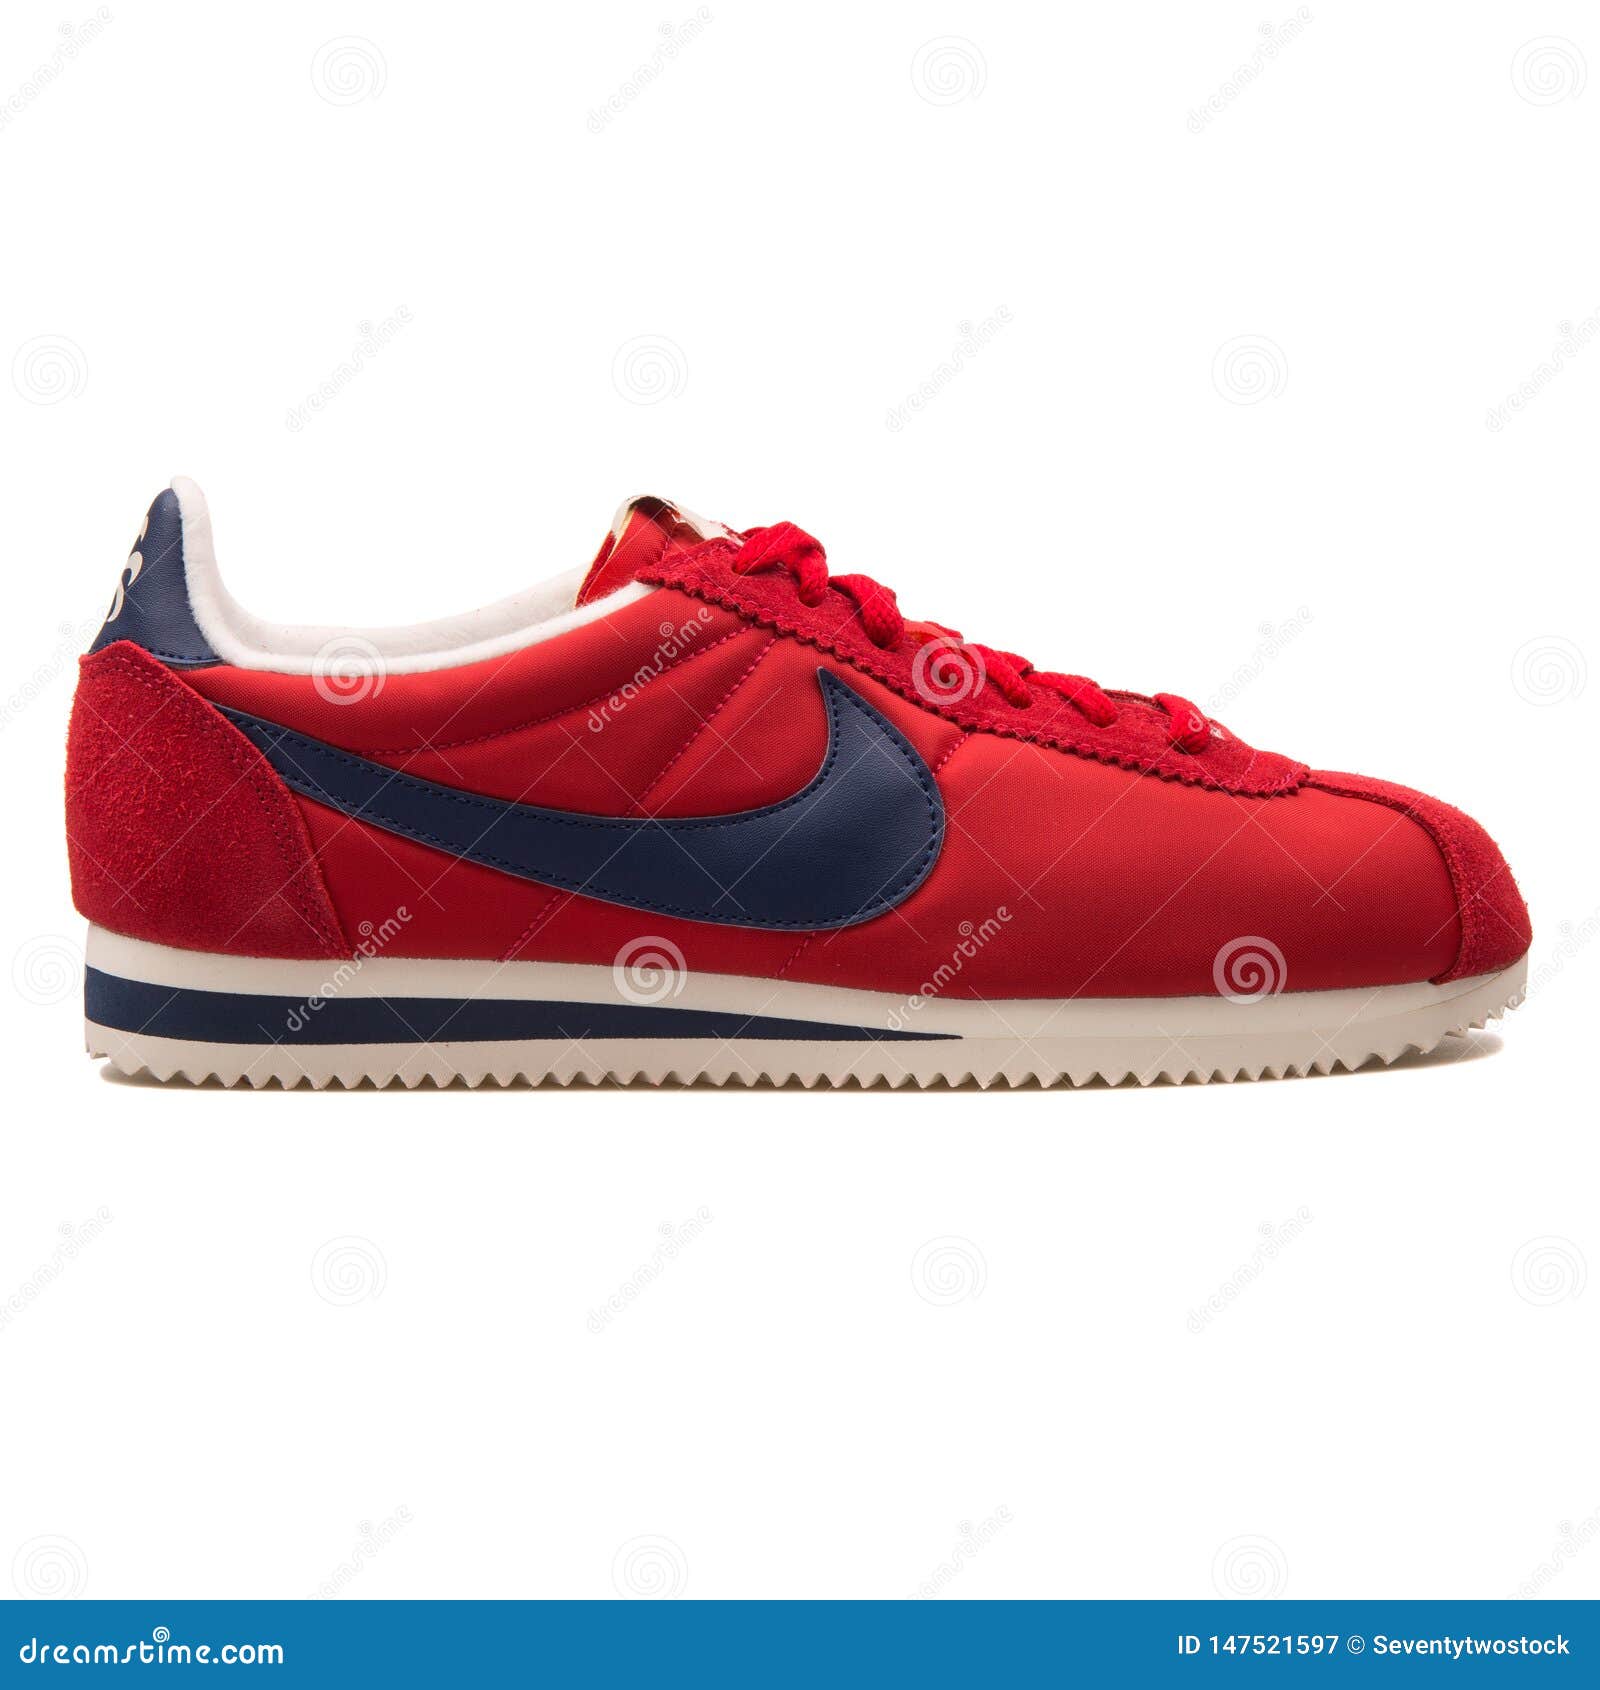 Classic Cortez Nylon AW Red Sneaker Editorial Photography - Image of kicks, item: 147521597